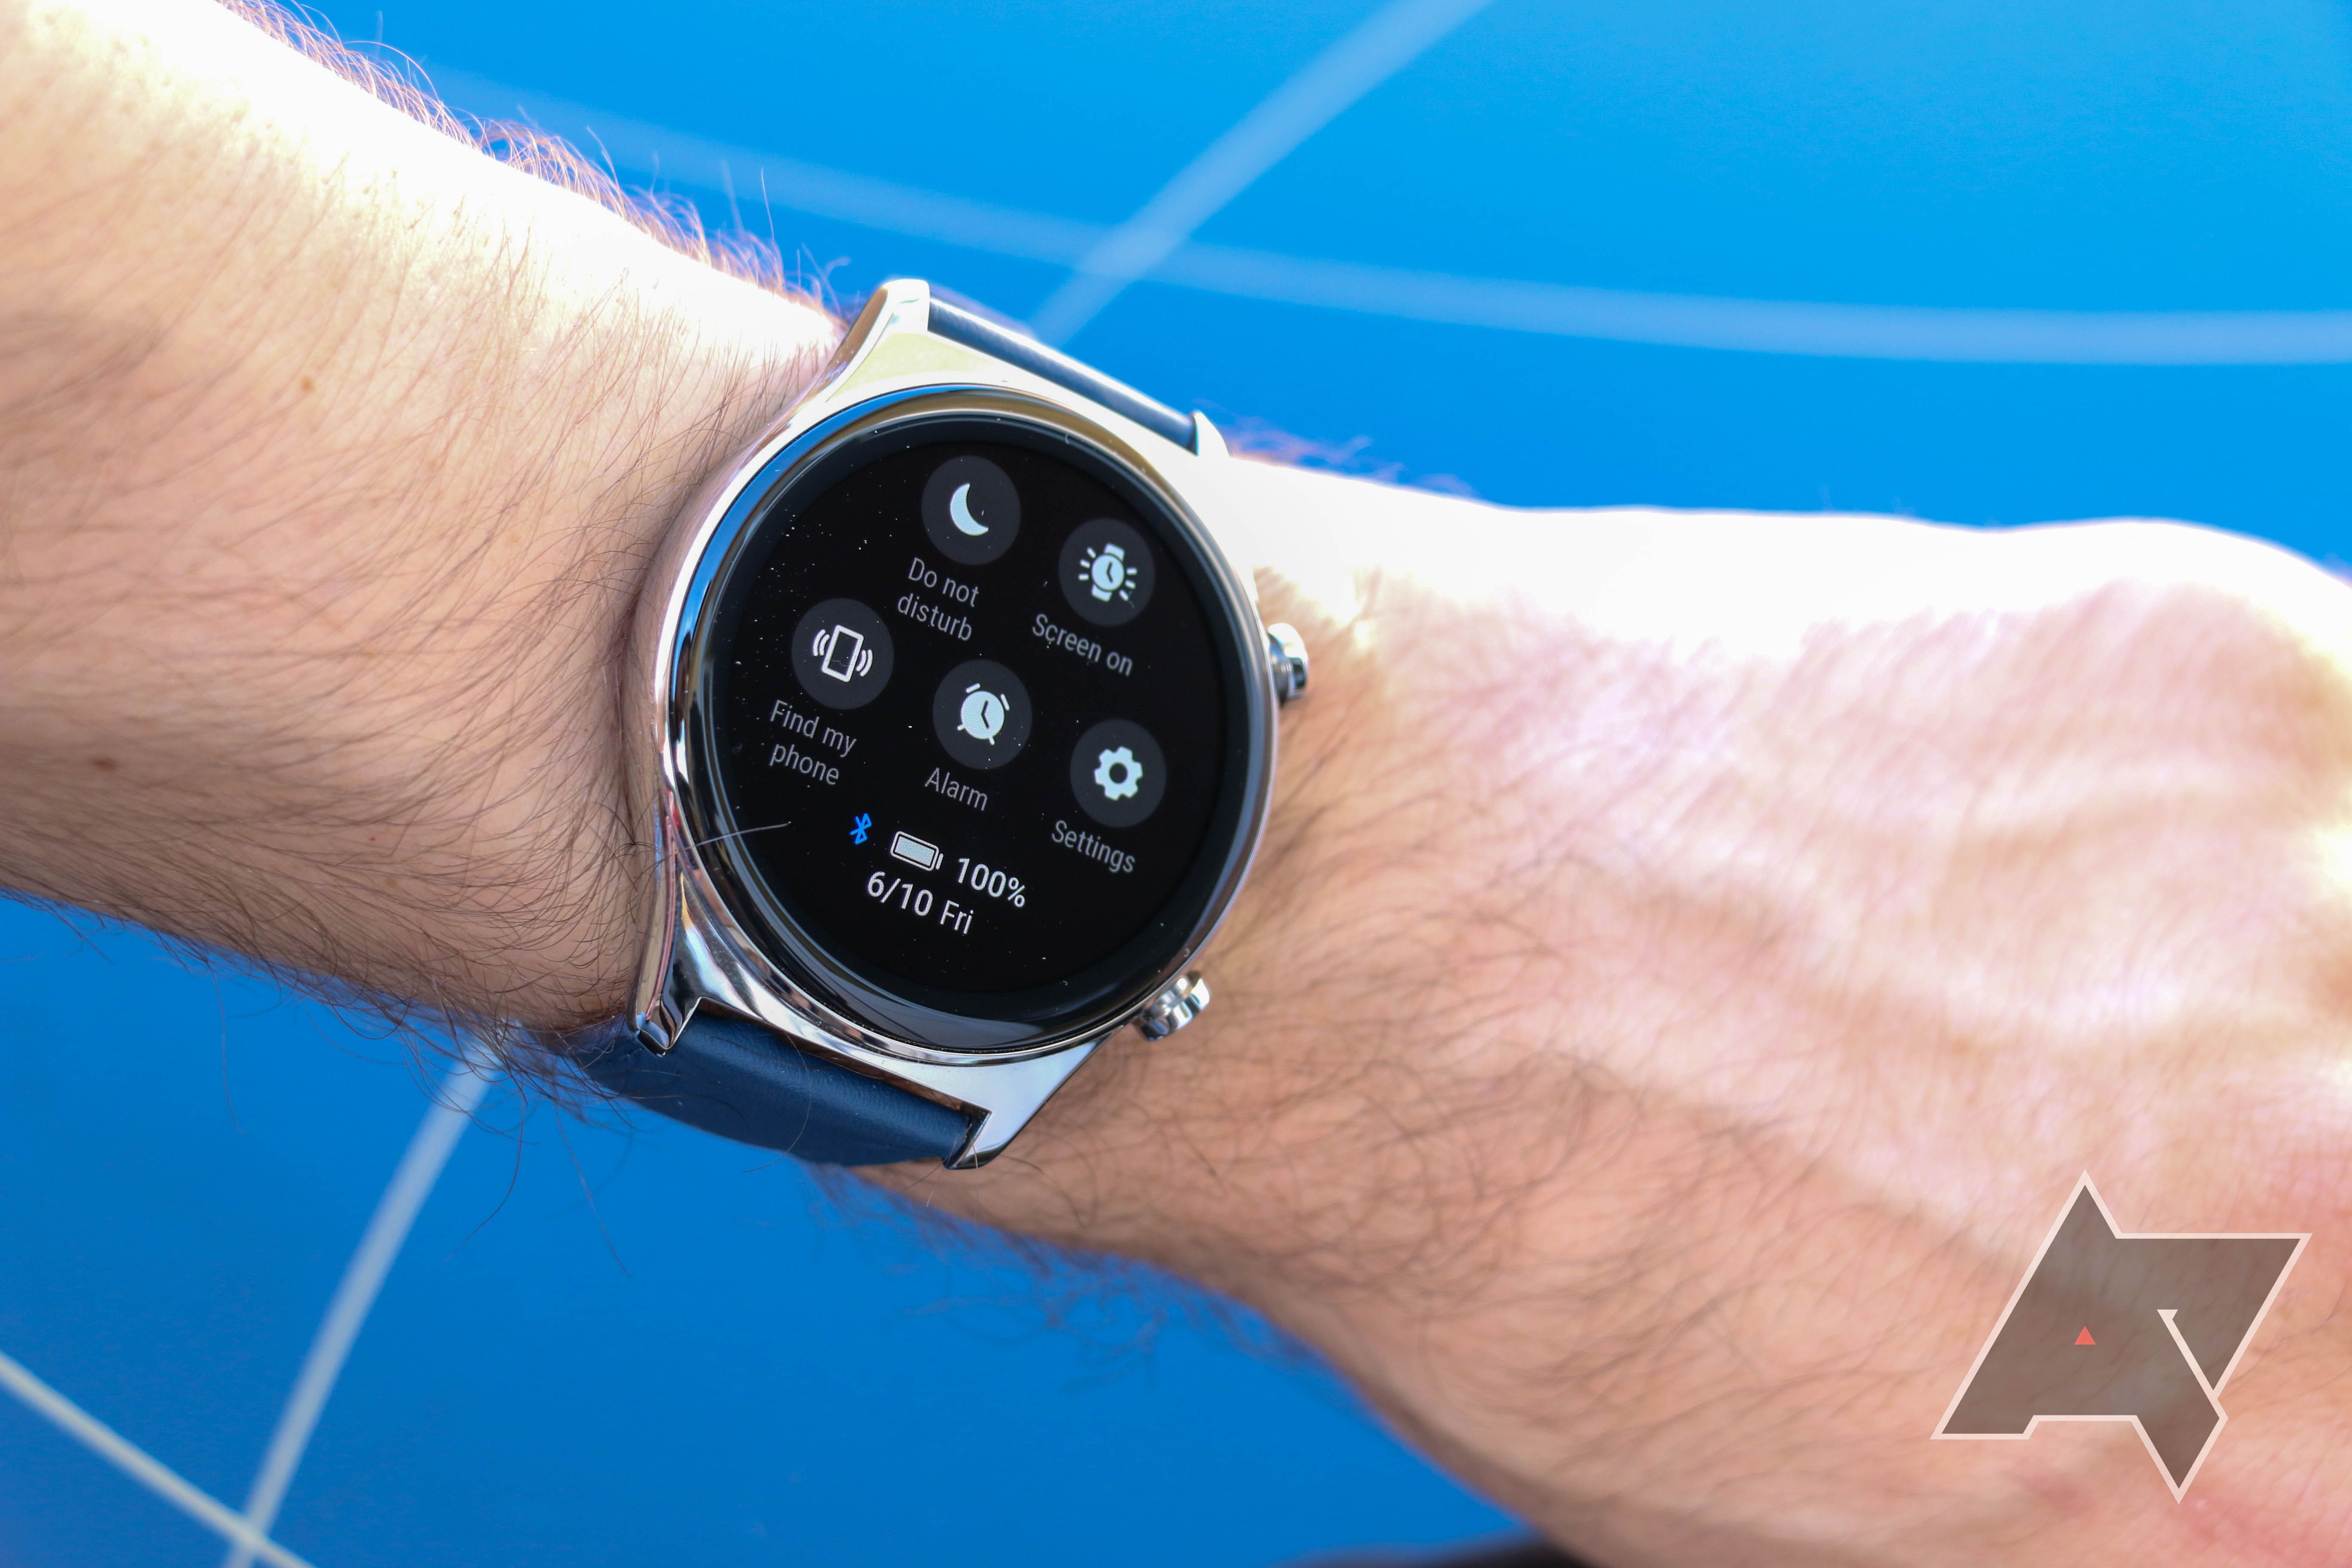 Honor Watch Magic is a toned down Huawei Watch GT designed for masses